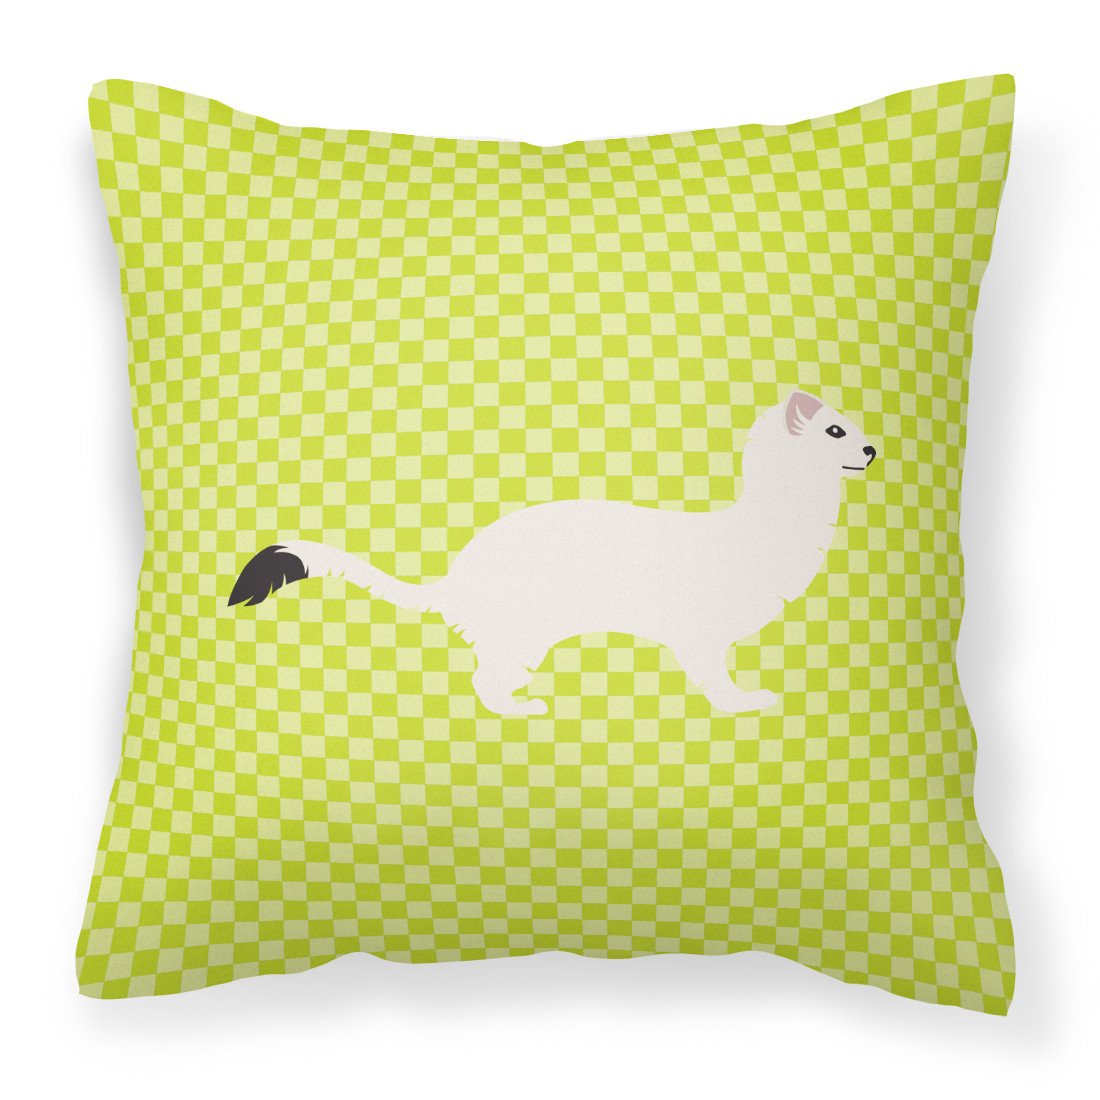 Stoat Short-tailed Weasel Green Fabric Decorative Pillow BB7698PW1818 by Caroline's Treasures